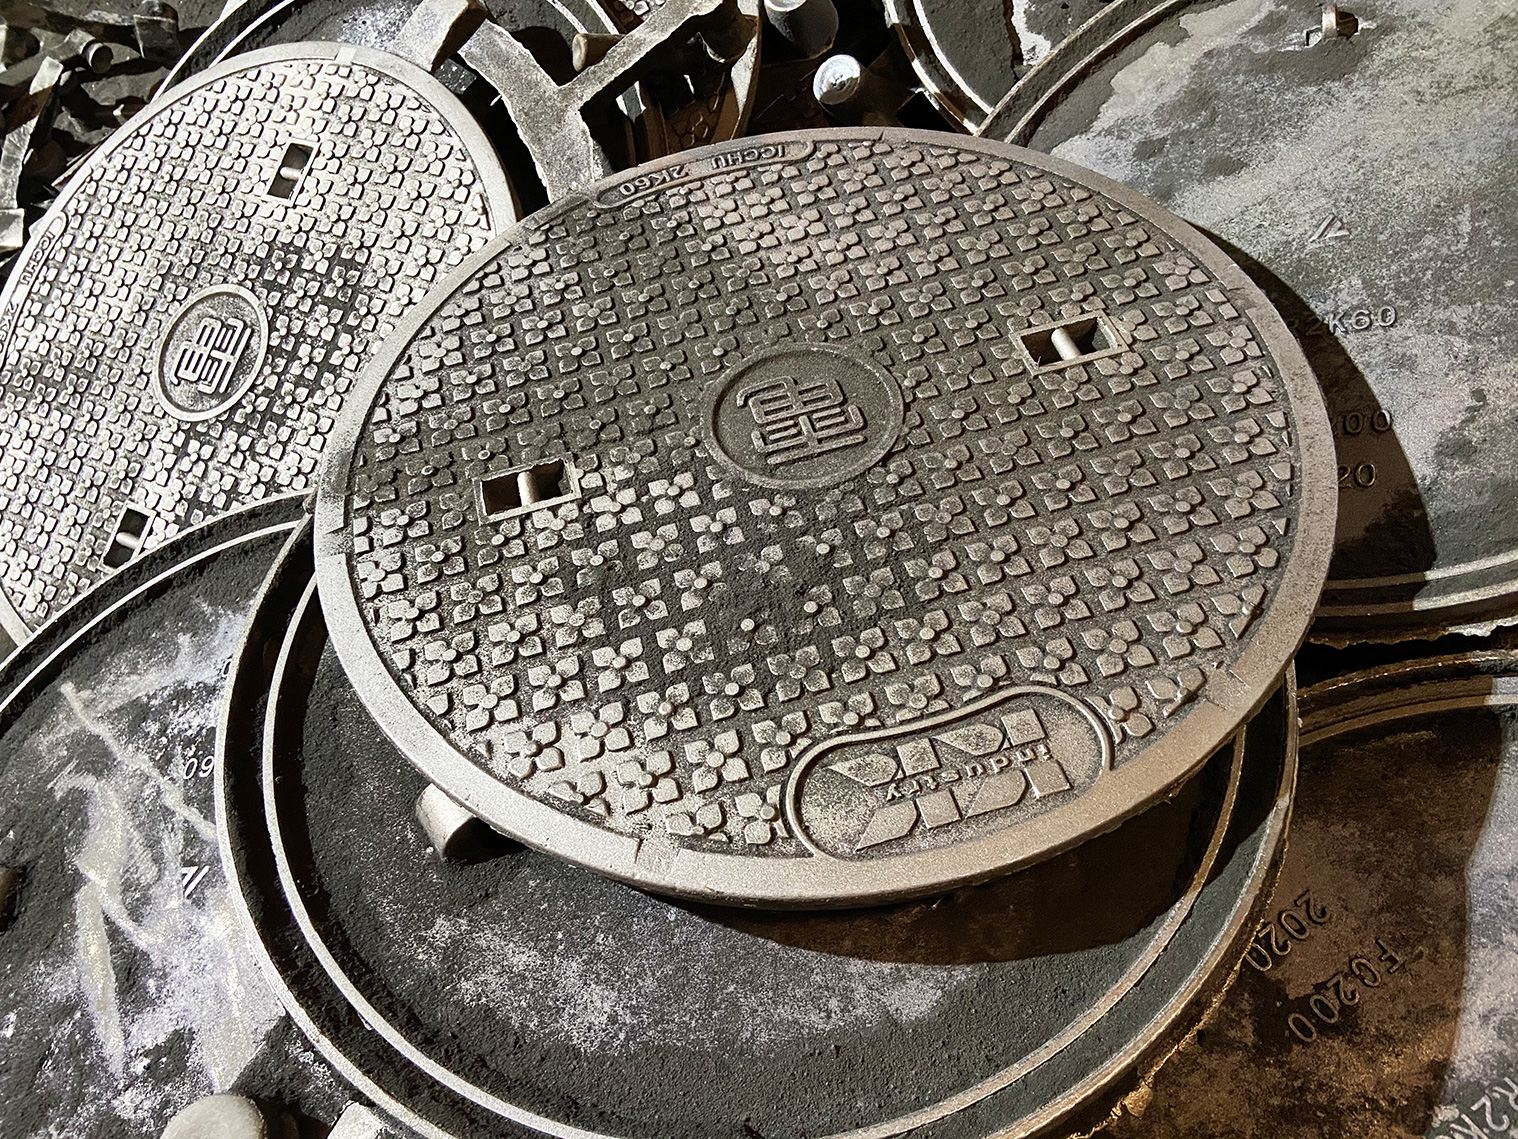 Production of manhole cover casting